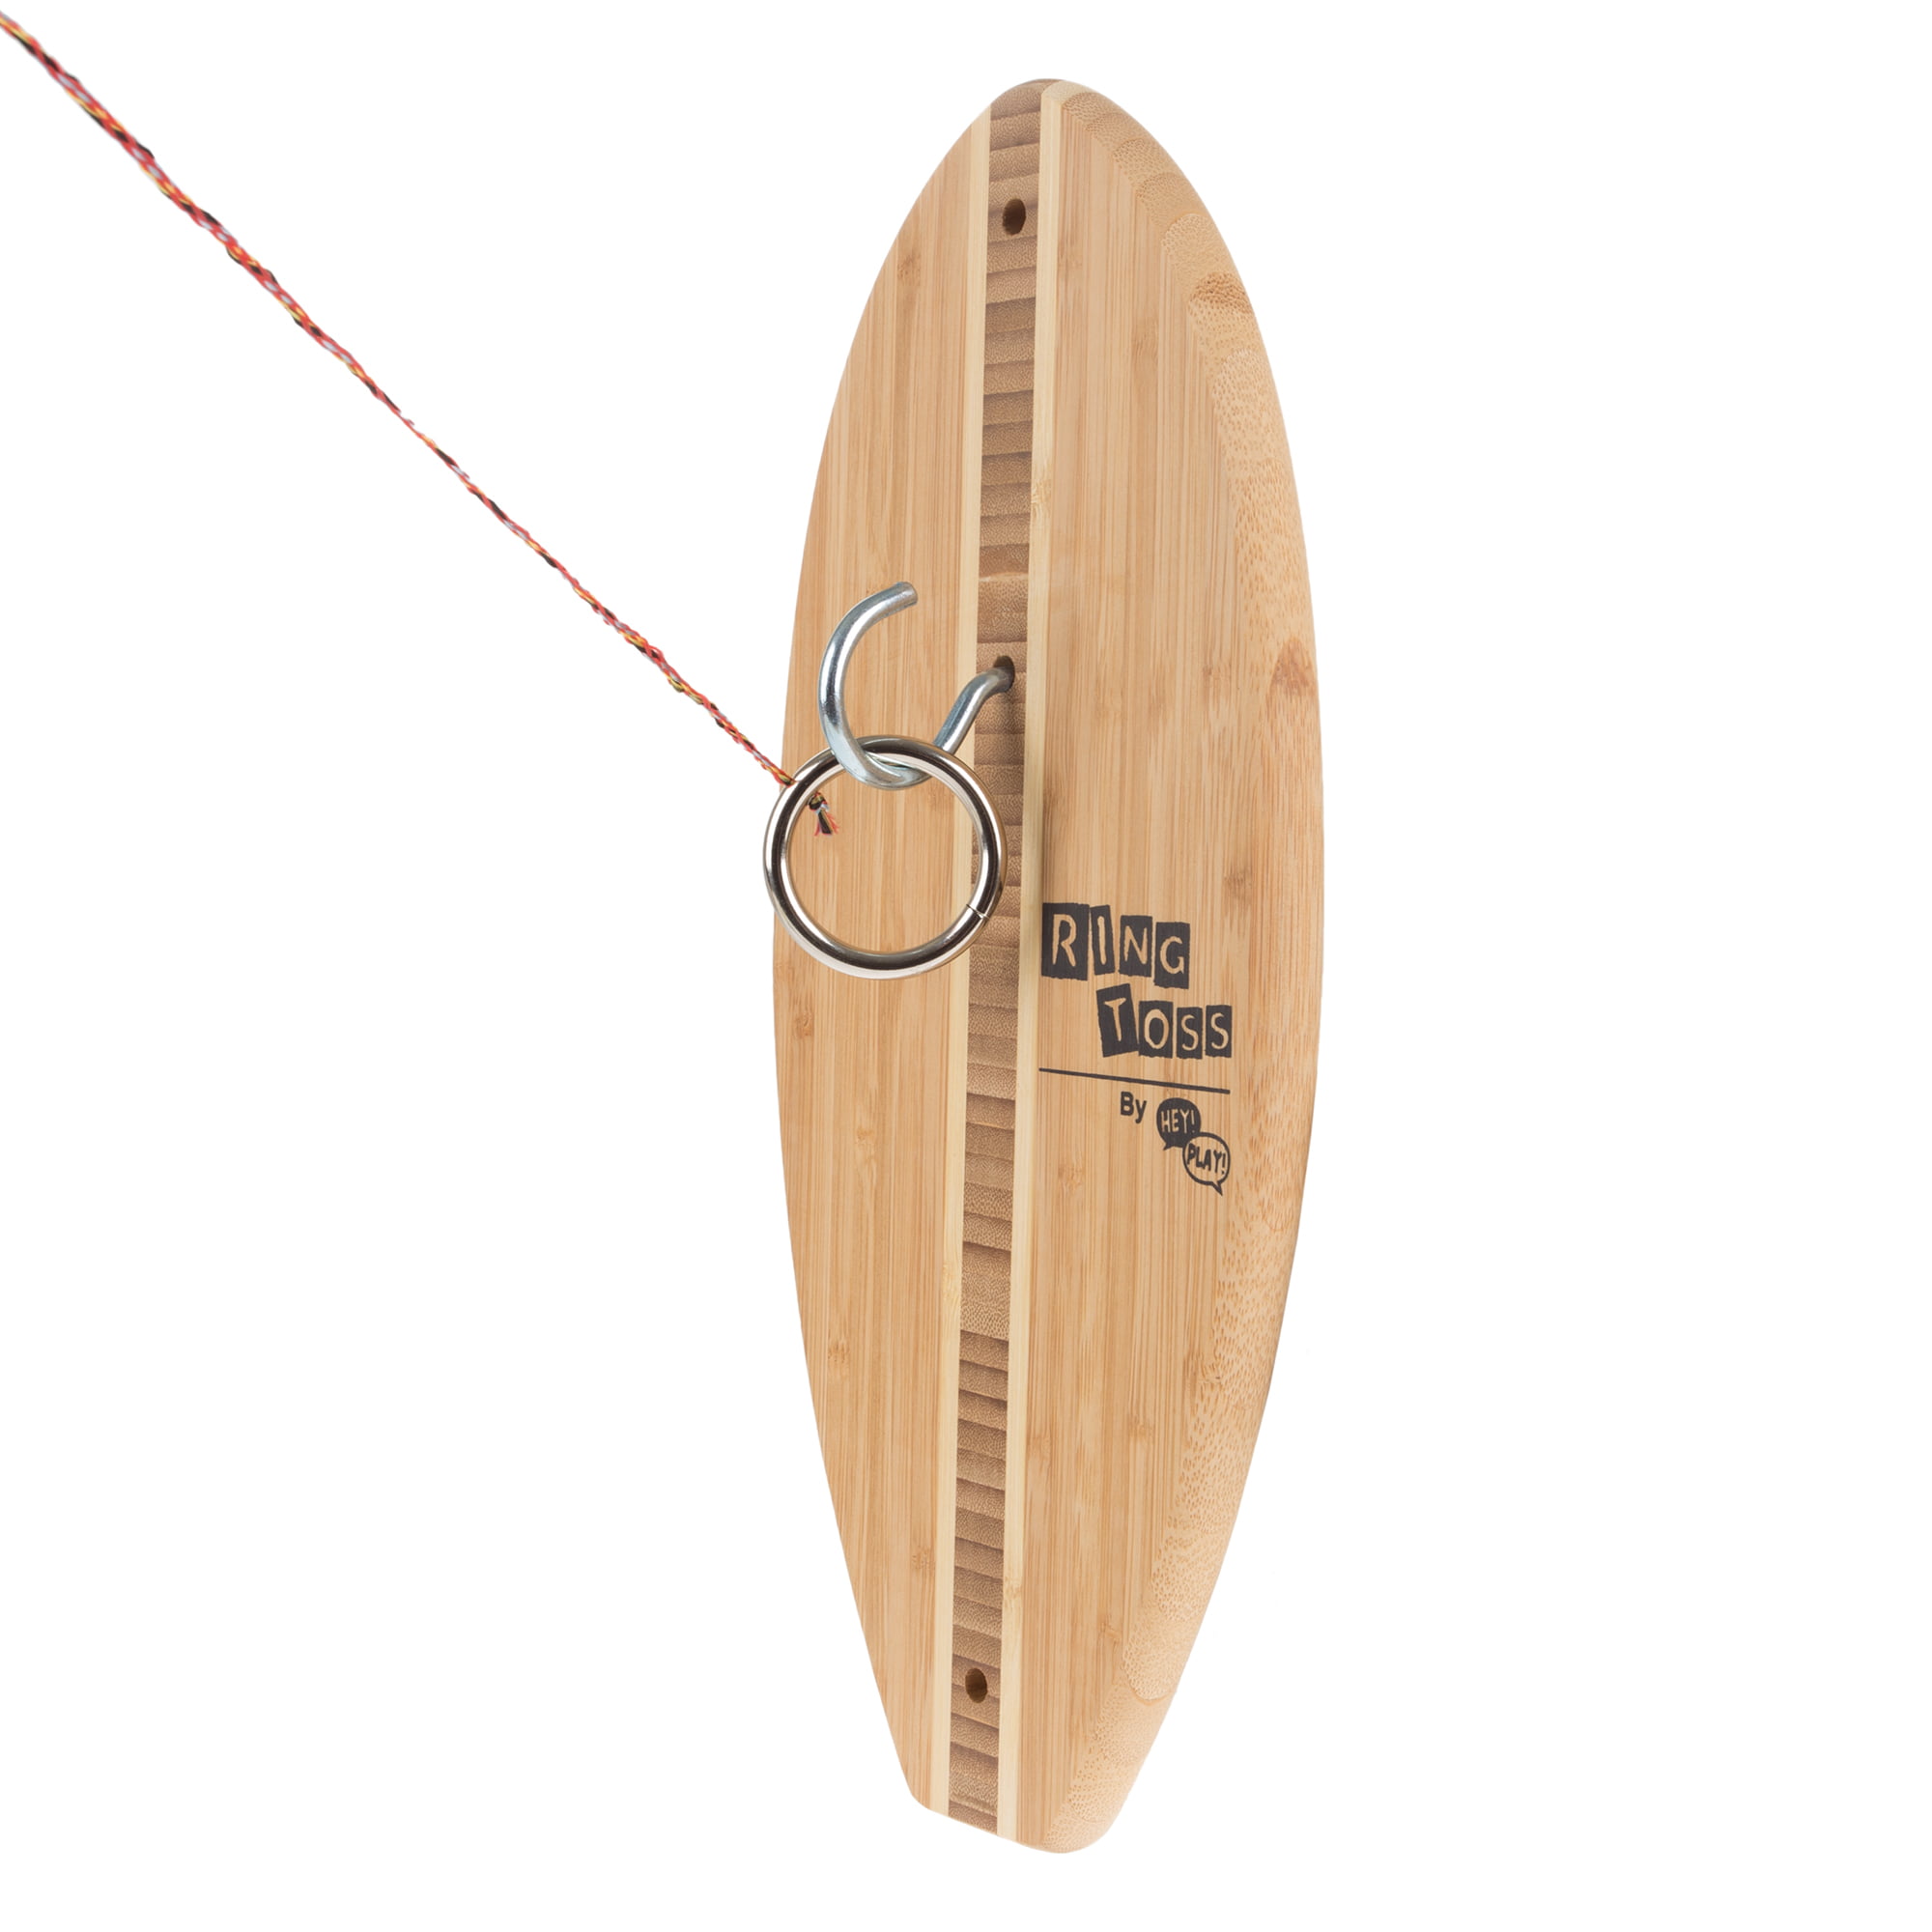 Hook and Ring Toss Game with Hand Crafted Bamboo Board For Outdoor